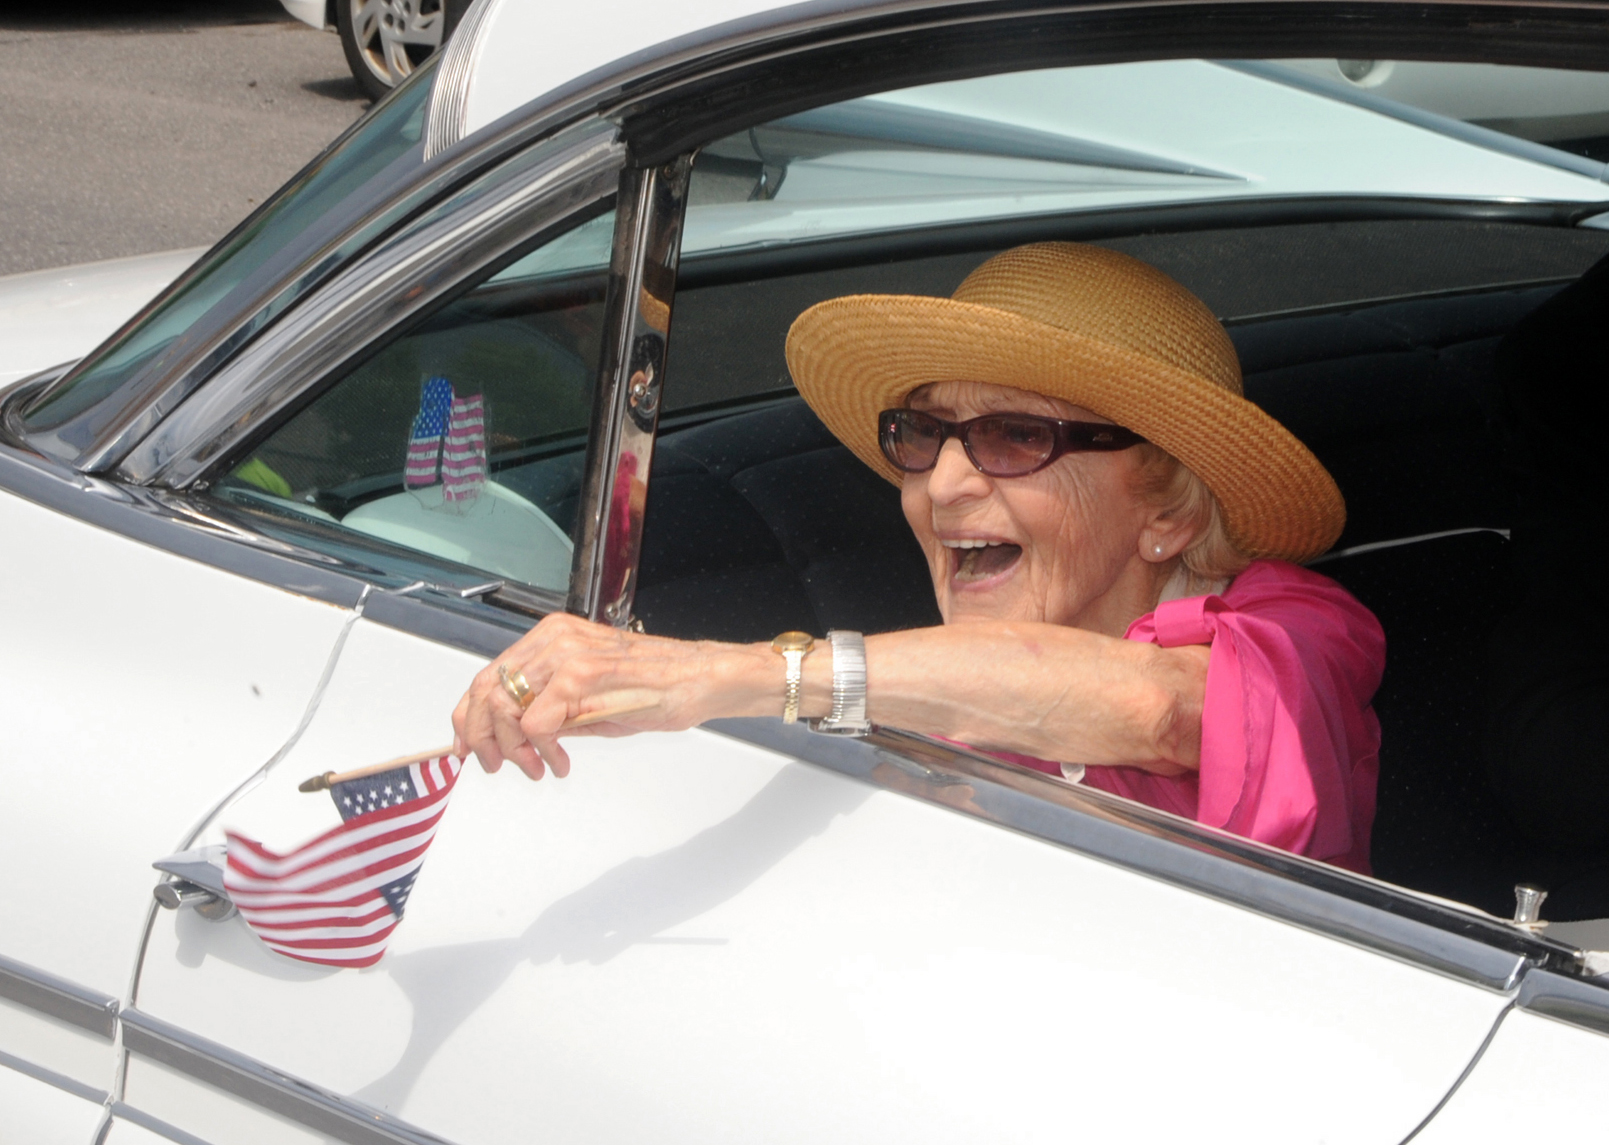 In this June 30, 2012 file photo, parade grand marshall actress Ellen Albertini Dow waves to the crowd as she rides in the back of a classic car during the Six-County Firemen's Parade in Mount Carmel, Northumberland County. Dow, a feisty and fiercely independent character actor best known for her salty rendition of Rappers Delight in The Wedding Singer, died Monday, May 4, 2015, according to her agent Juliet Green. She was 101.  (Mike Staugaitis/The News-Item via AP, File)